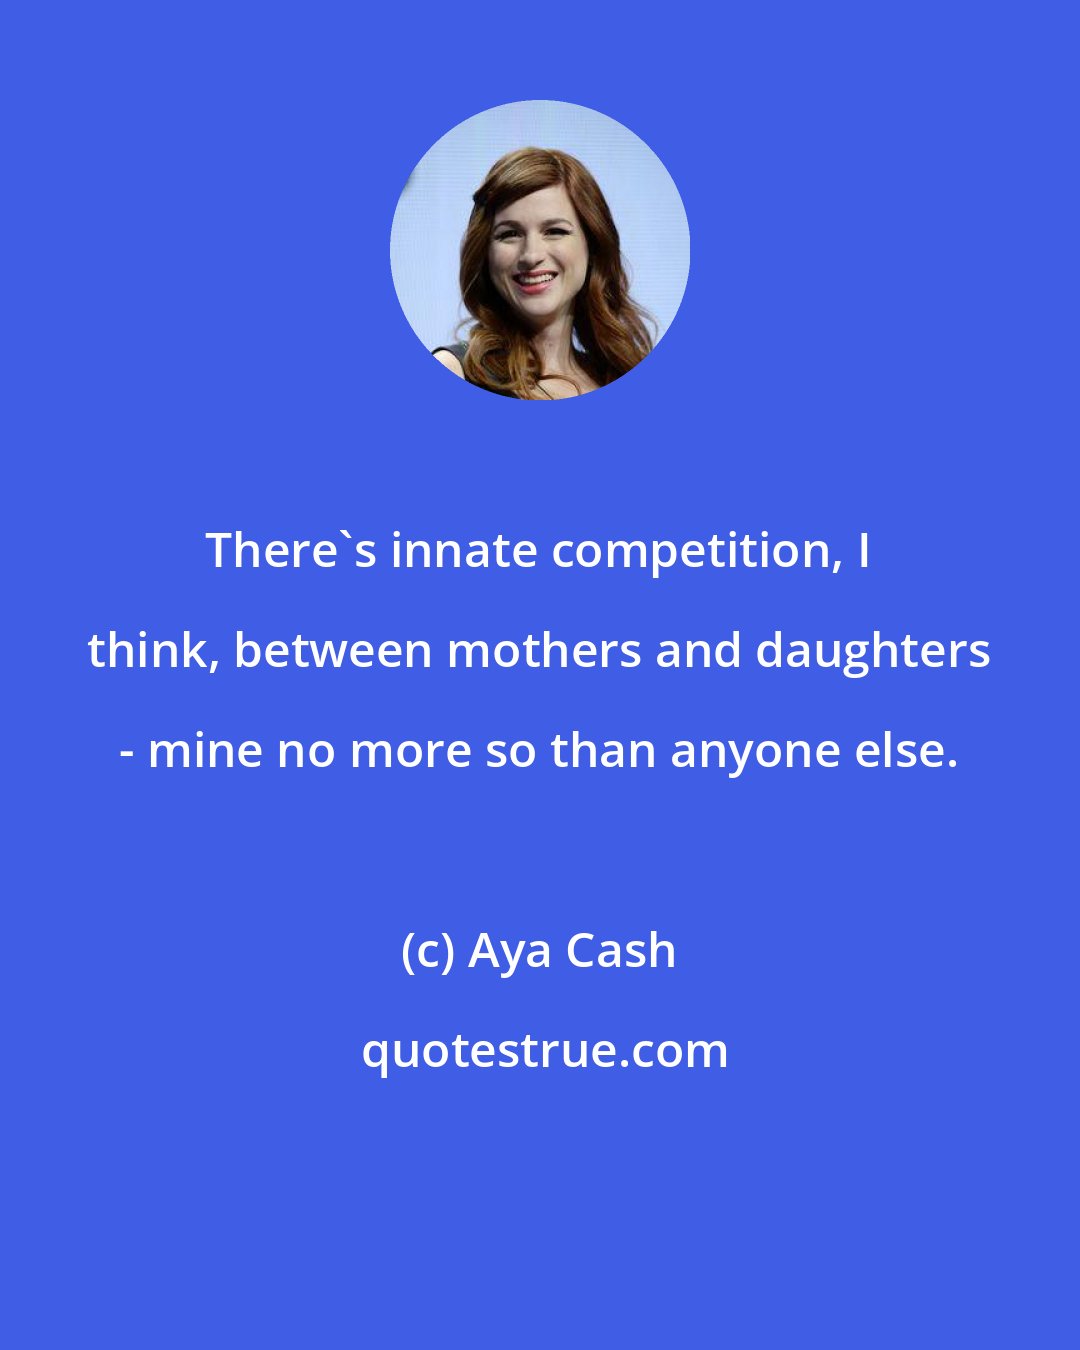 Aya Cash: There's innate competition, I think, between mothers and daughters - mine no more so than anyone else.